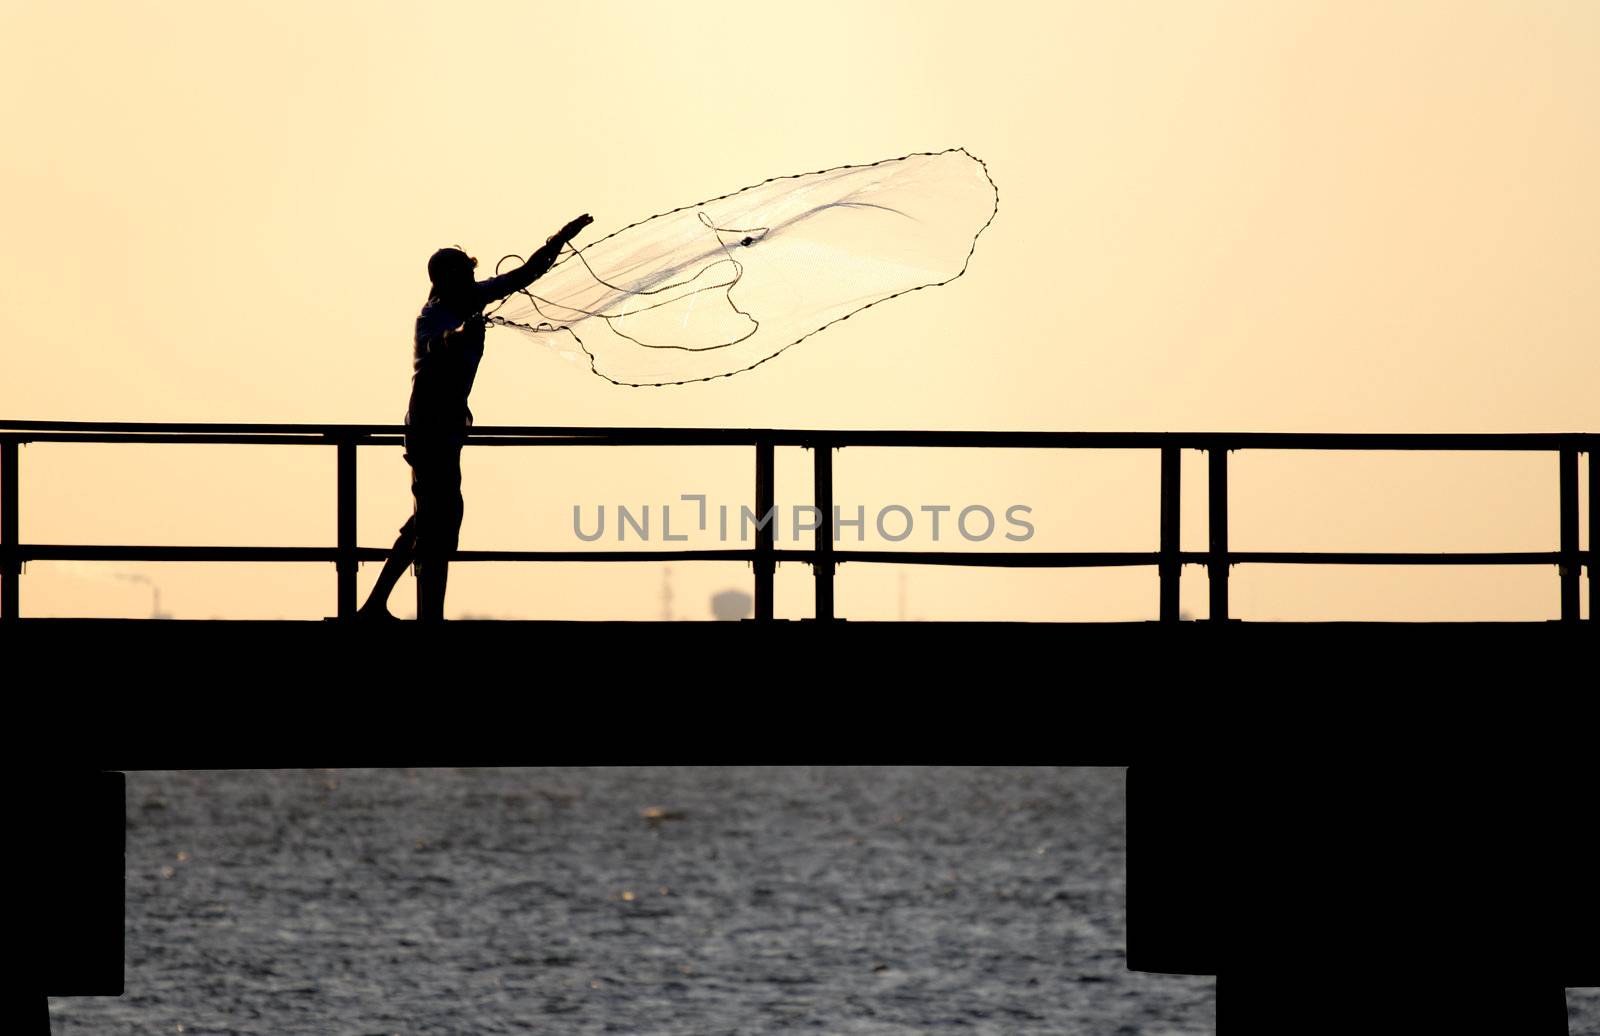 Fisherman tossing a net from a pier.